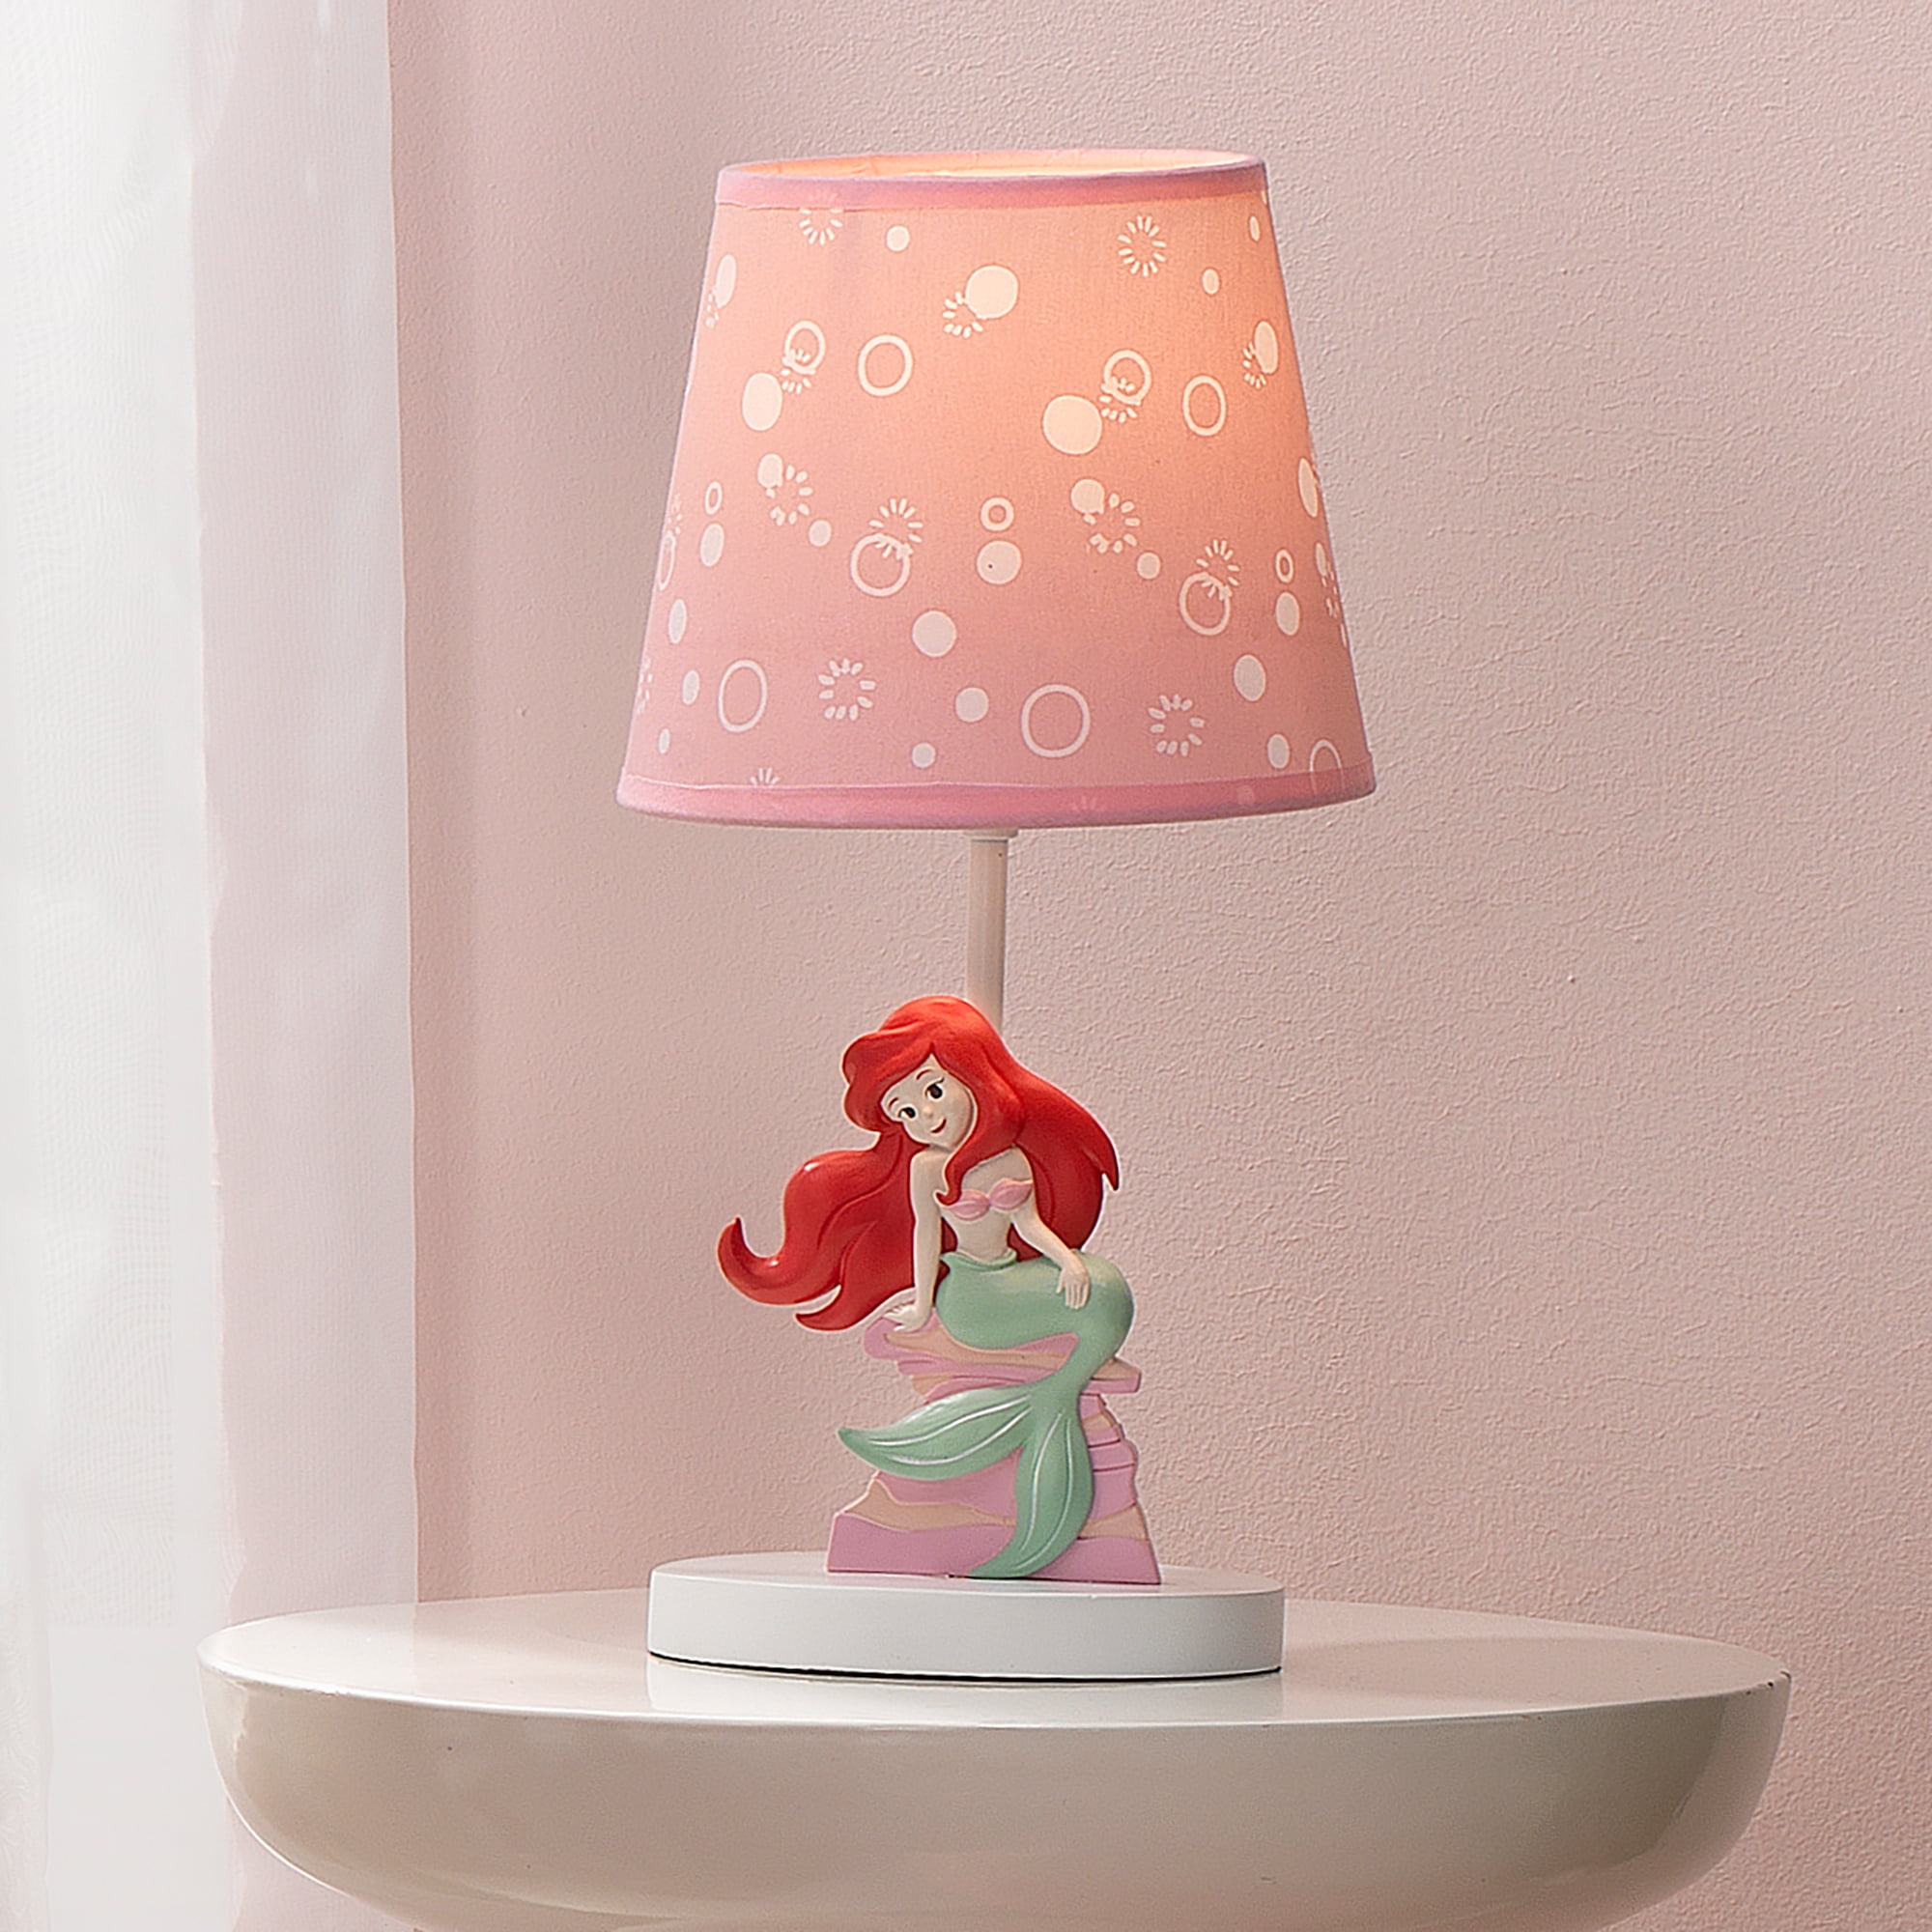 Disney Princess LED Lamp With Shade Pink Girls New Battery Operated Ariel 